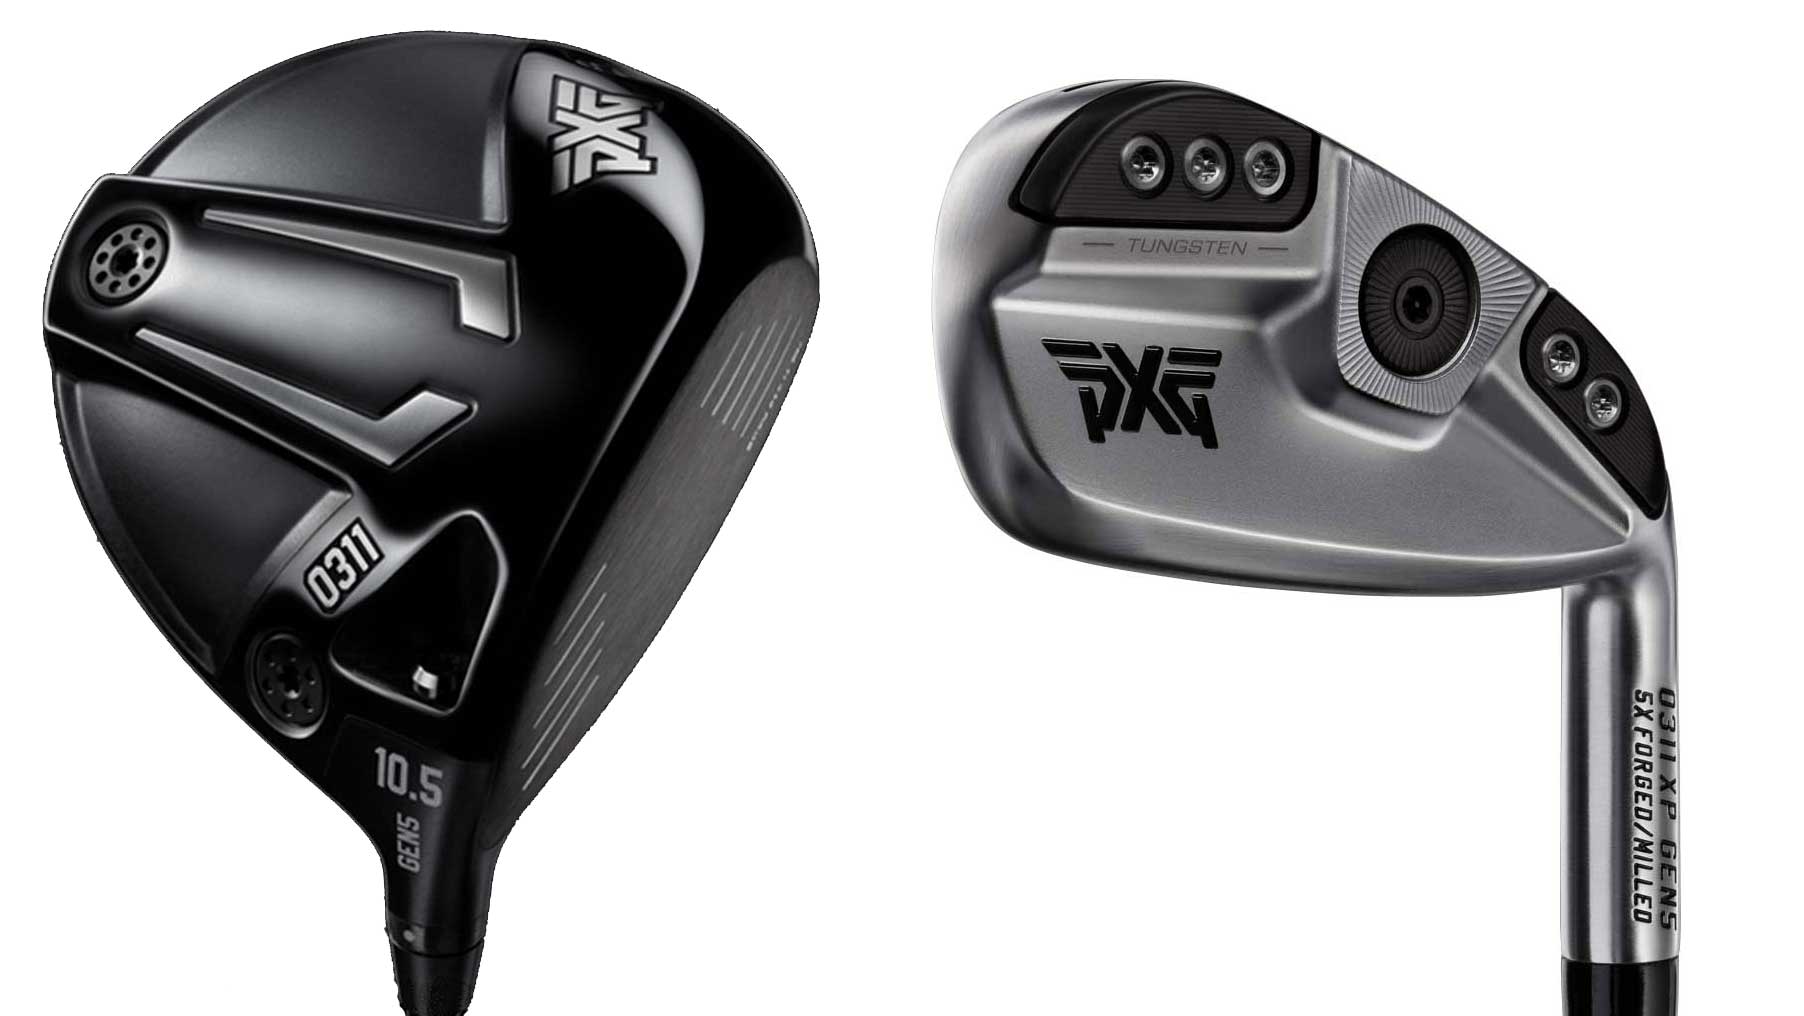 PXG Early Black Friday Deals, Drivers Under 0